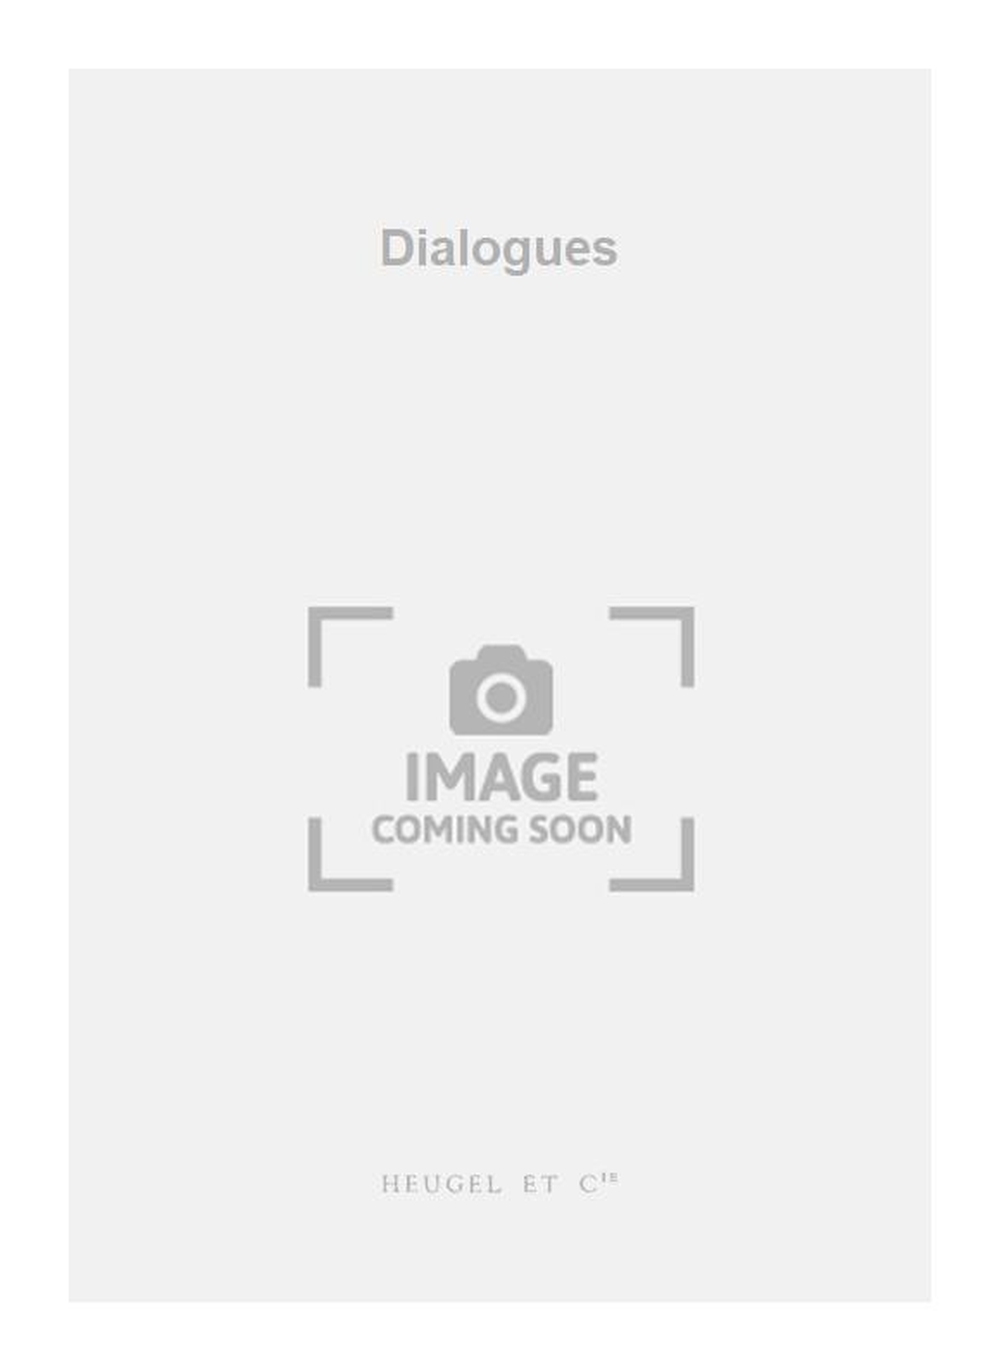 Marcel Mihalovici: Dialogues